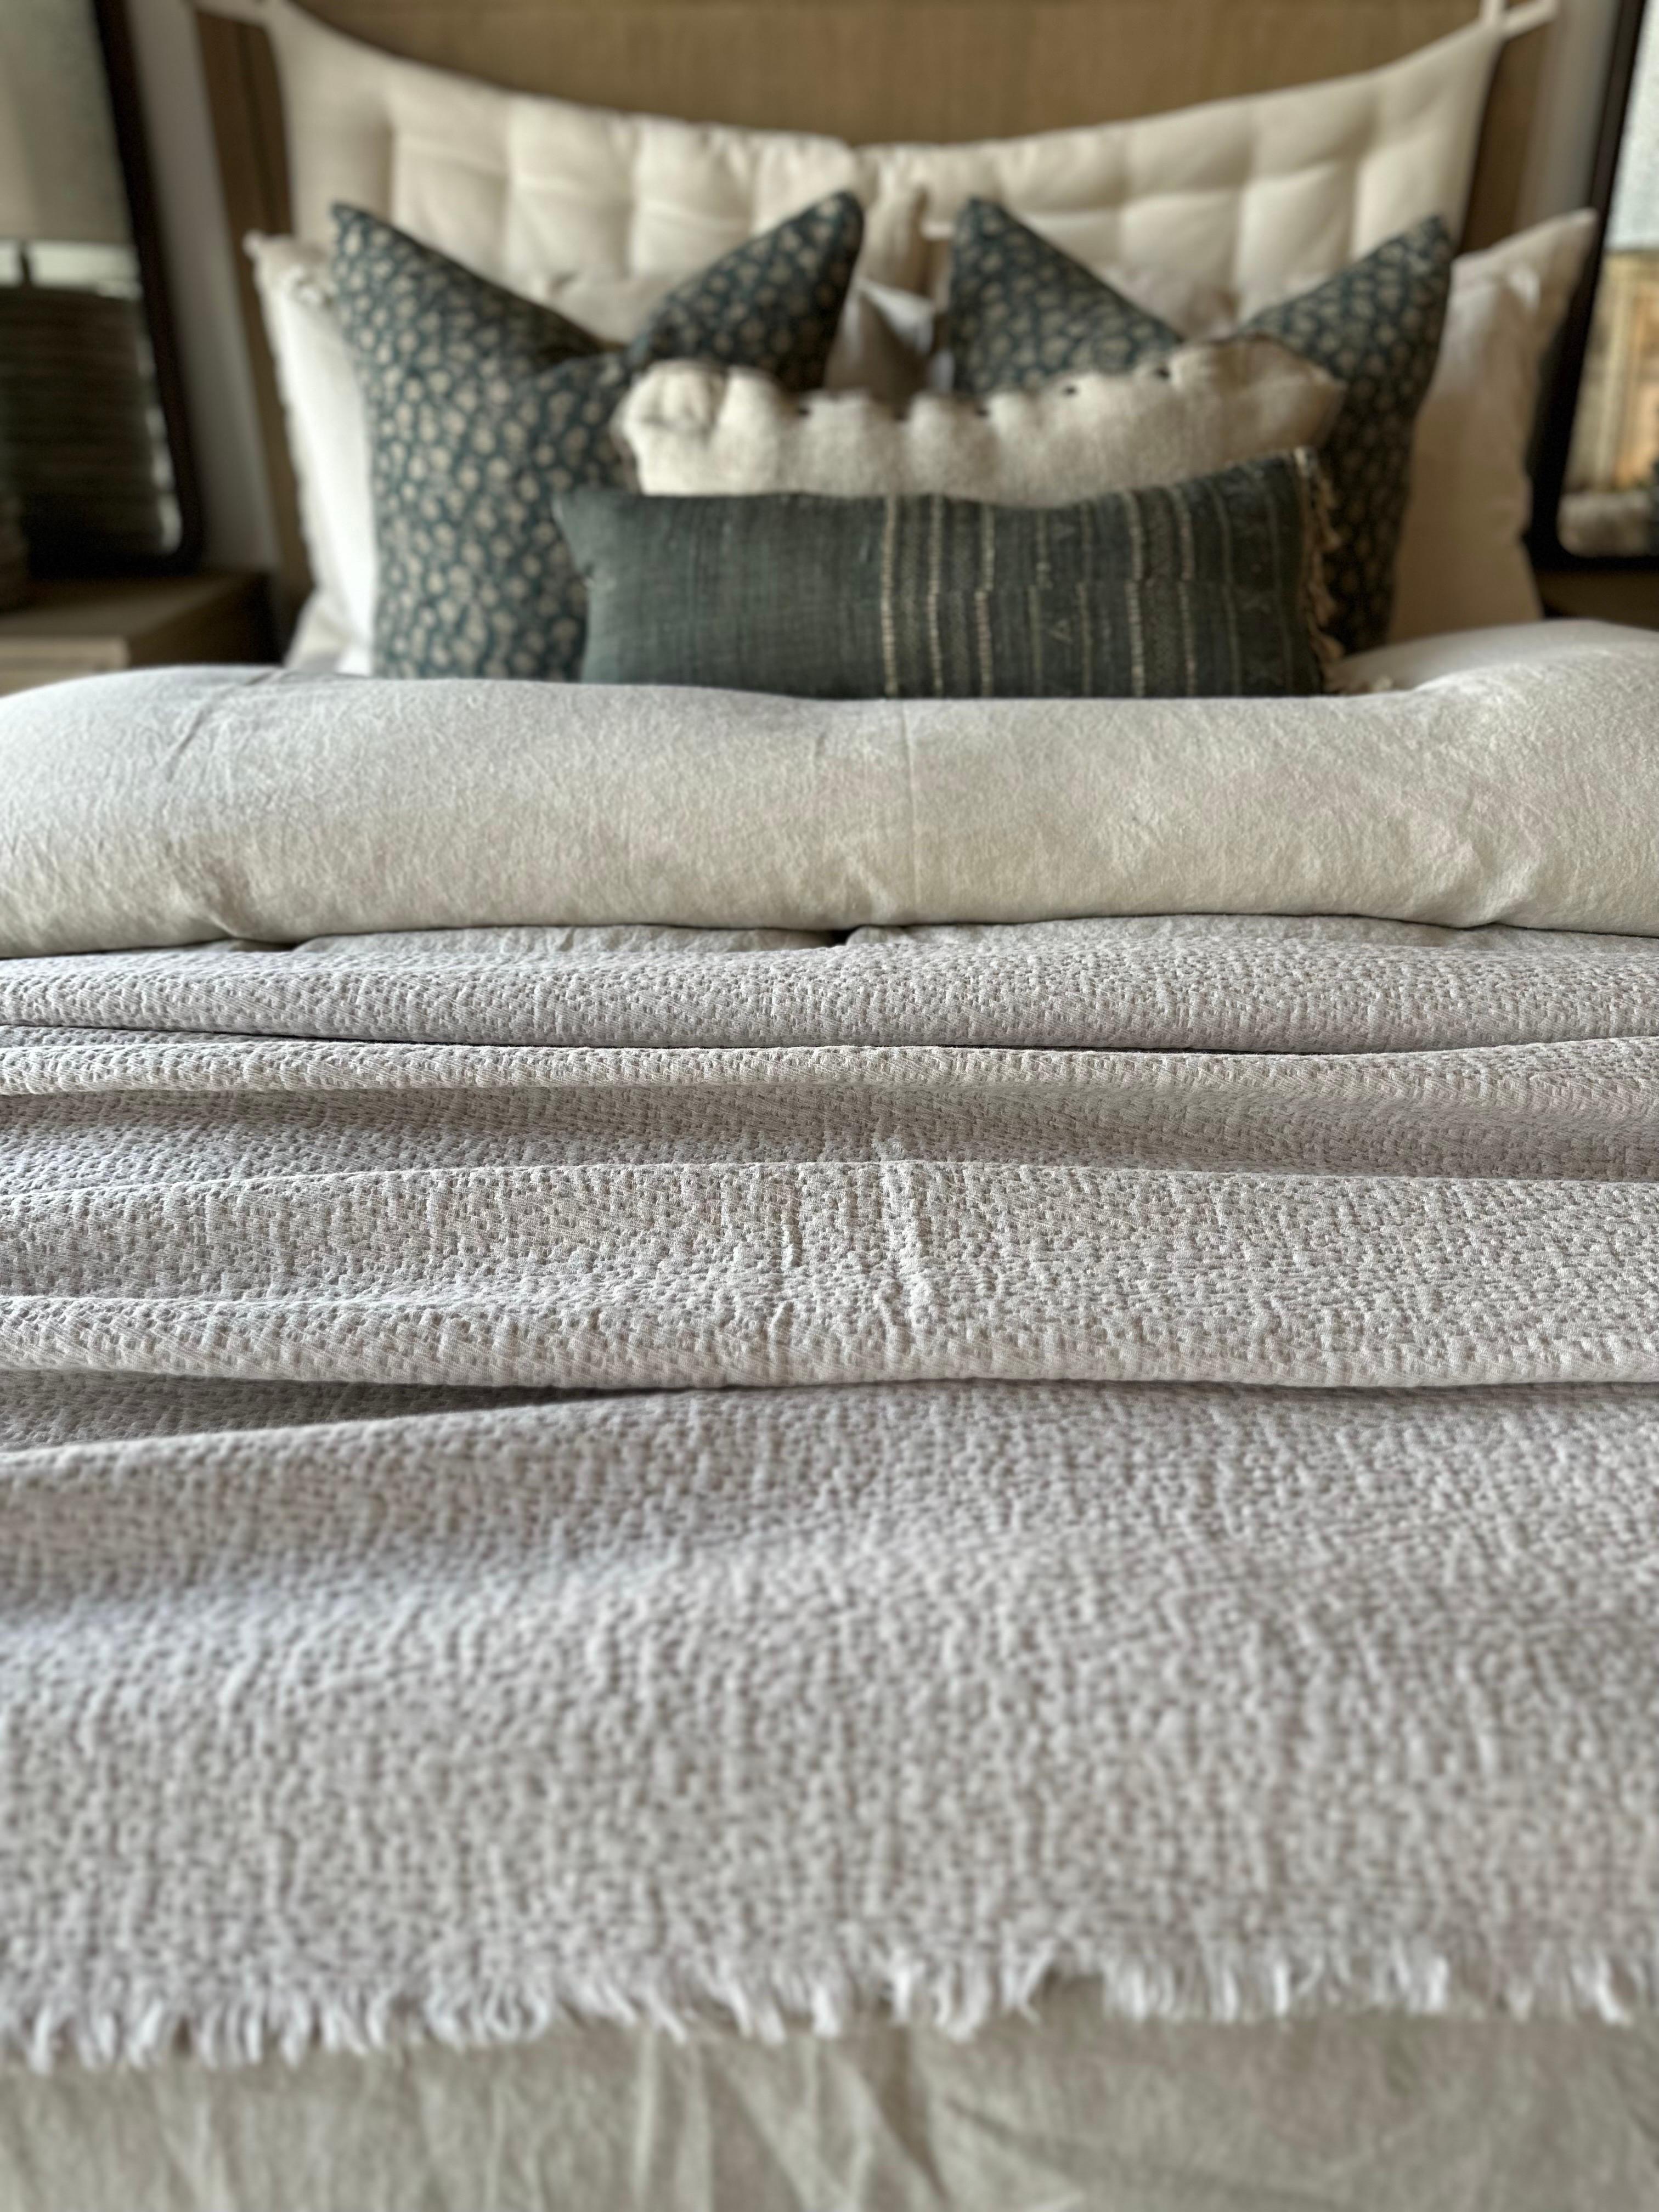 A soft plush cotton baffle waffle cotton coverlet. Great to use as an accent at the end of the bed, or use as a coverlet.
Color: Beige-rose-104-94 (nude beige tone with a subtle blush hue)
Size : 94x102
Large size can accomodate a queen size or